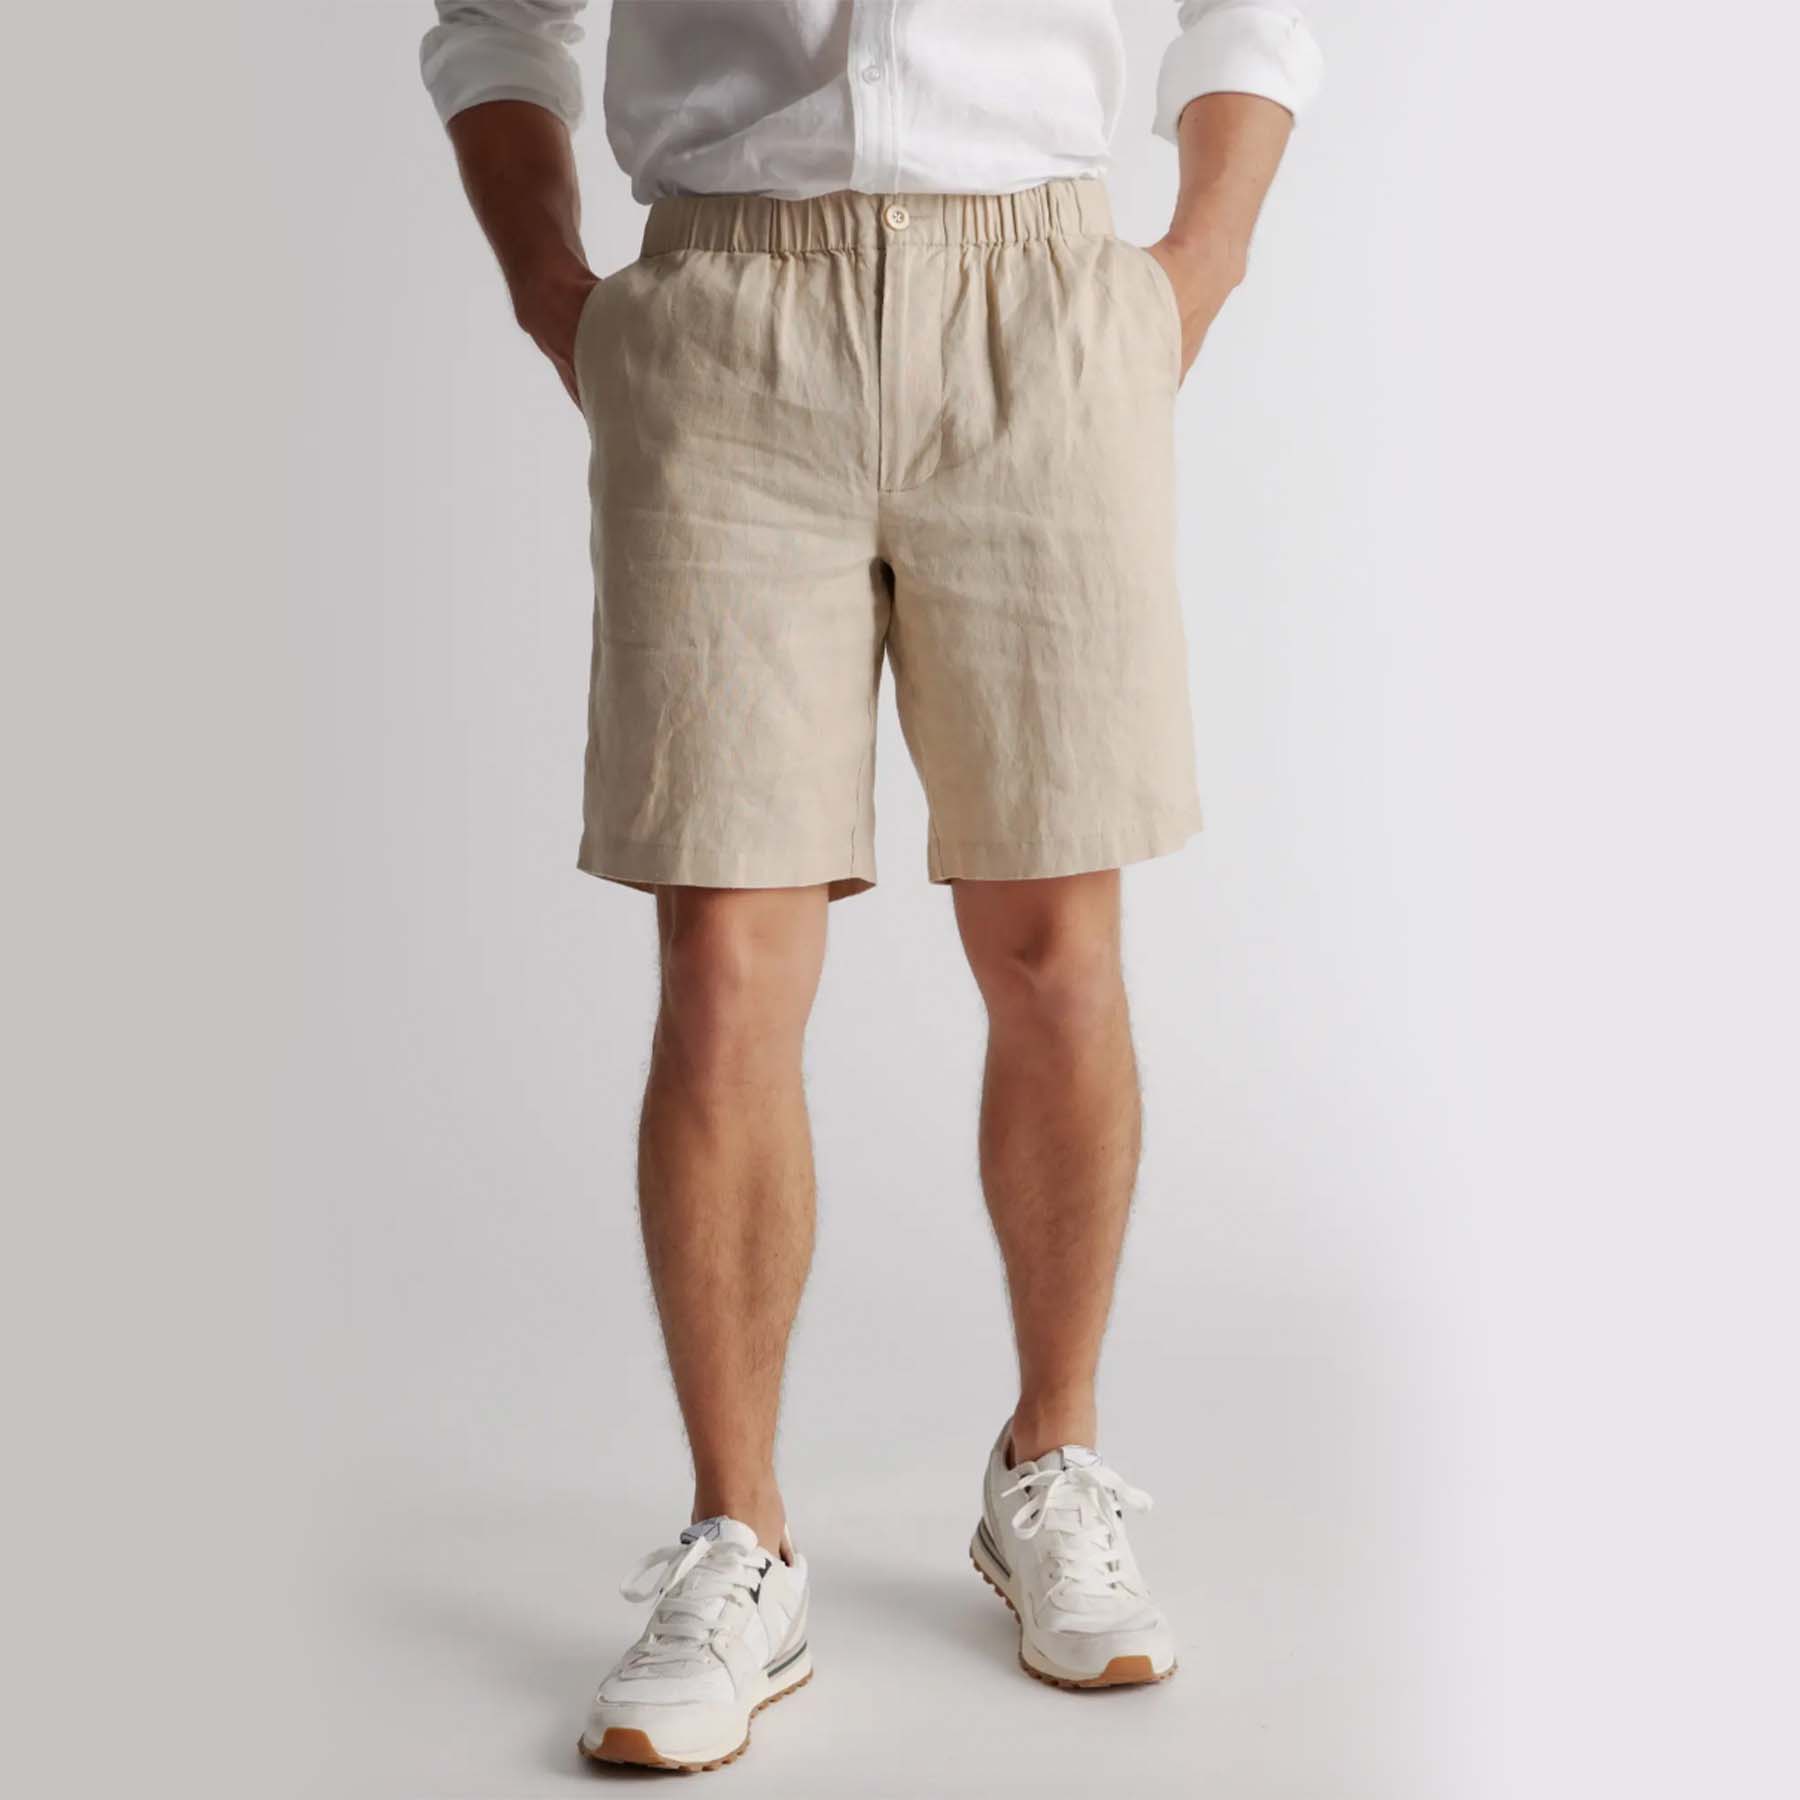 TOP 5 BEST SHORTS FOR SUMMER 2020! STYLISH SHORTS FOR GUYS! HOW TO STYLE:  STREETWEAR & MENSWEAR 